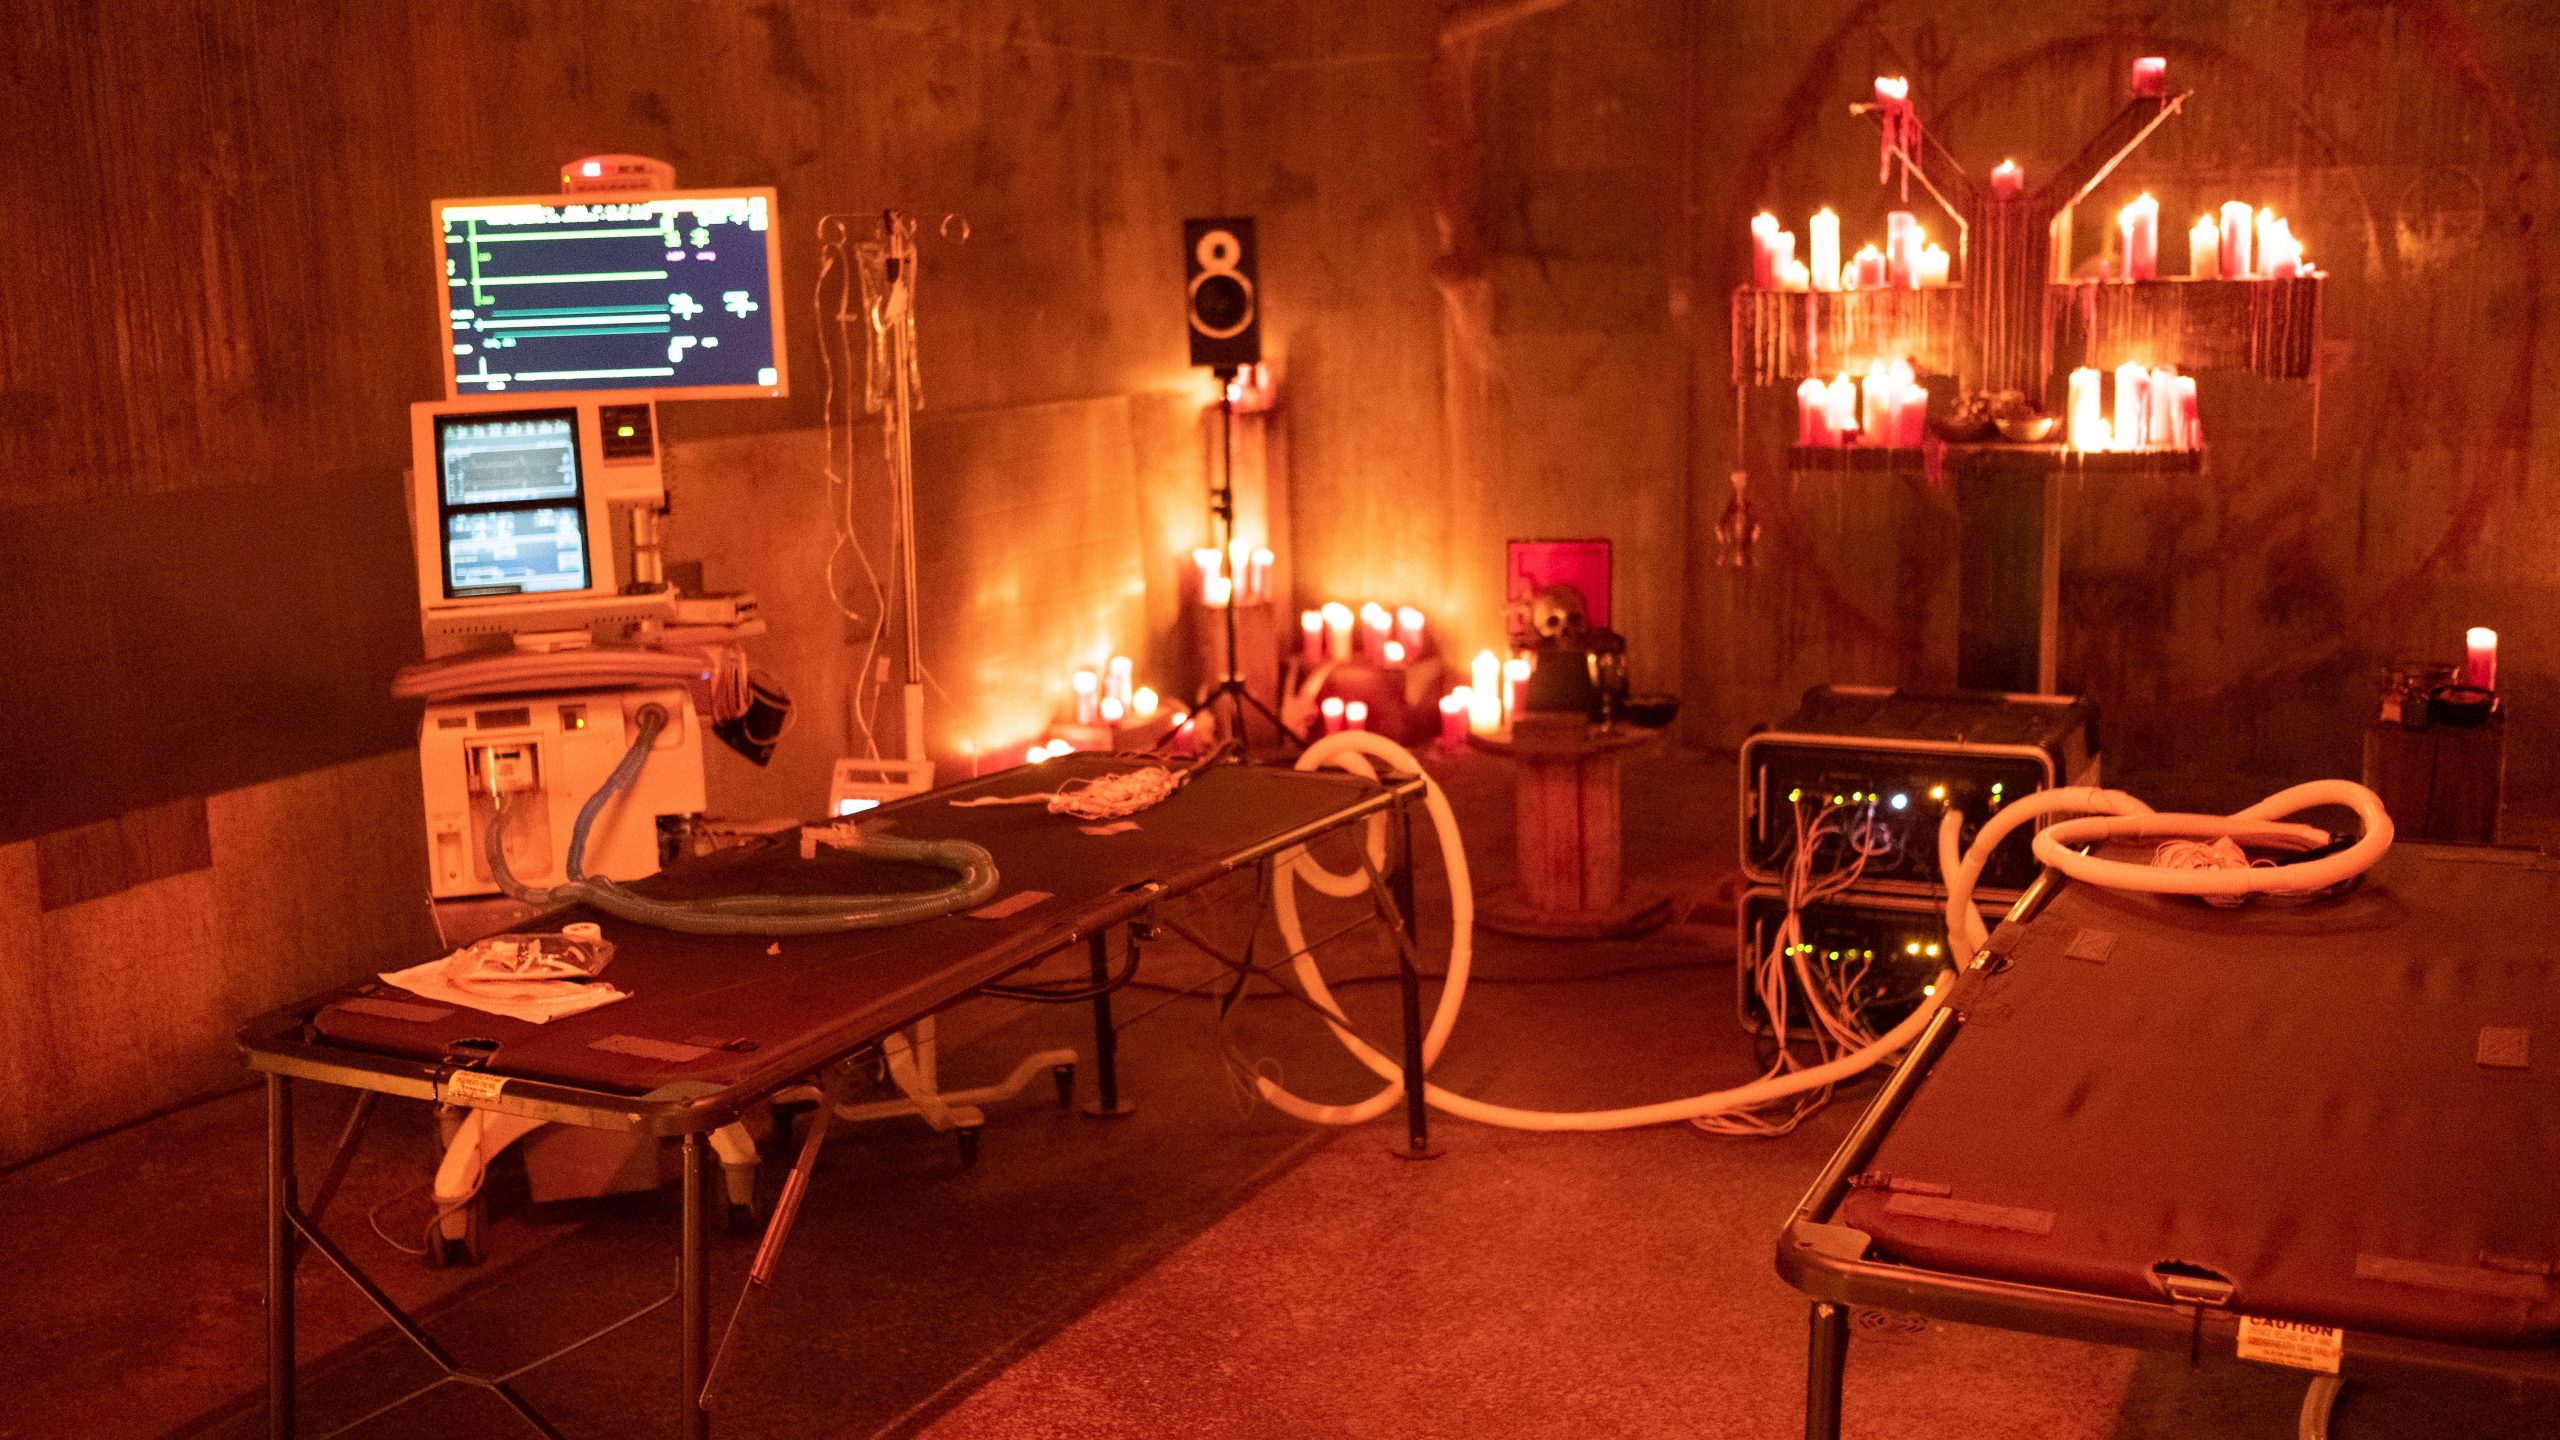 A VR set hooked up to medical supplies and anesthetics around a sinister looking chapel with burning candles and demon imagery as seen in DEMONIC directed by Neill Blomkamp. 